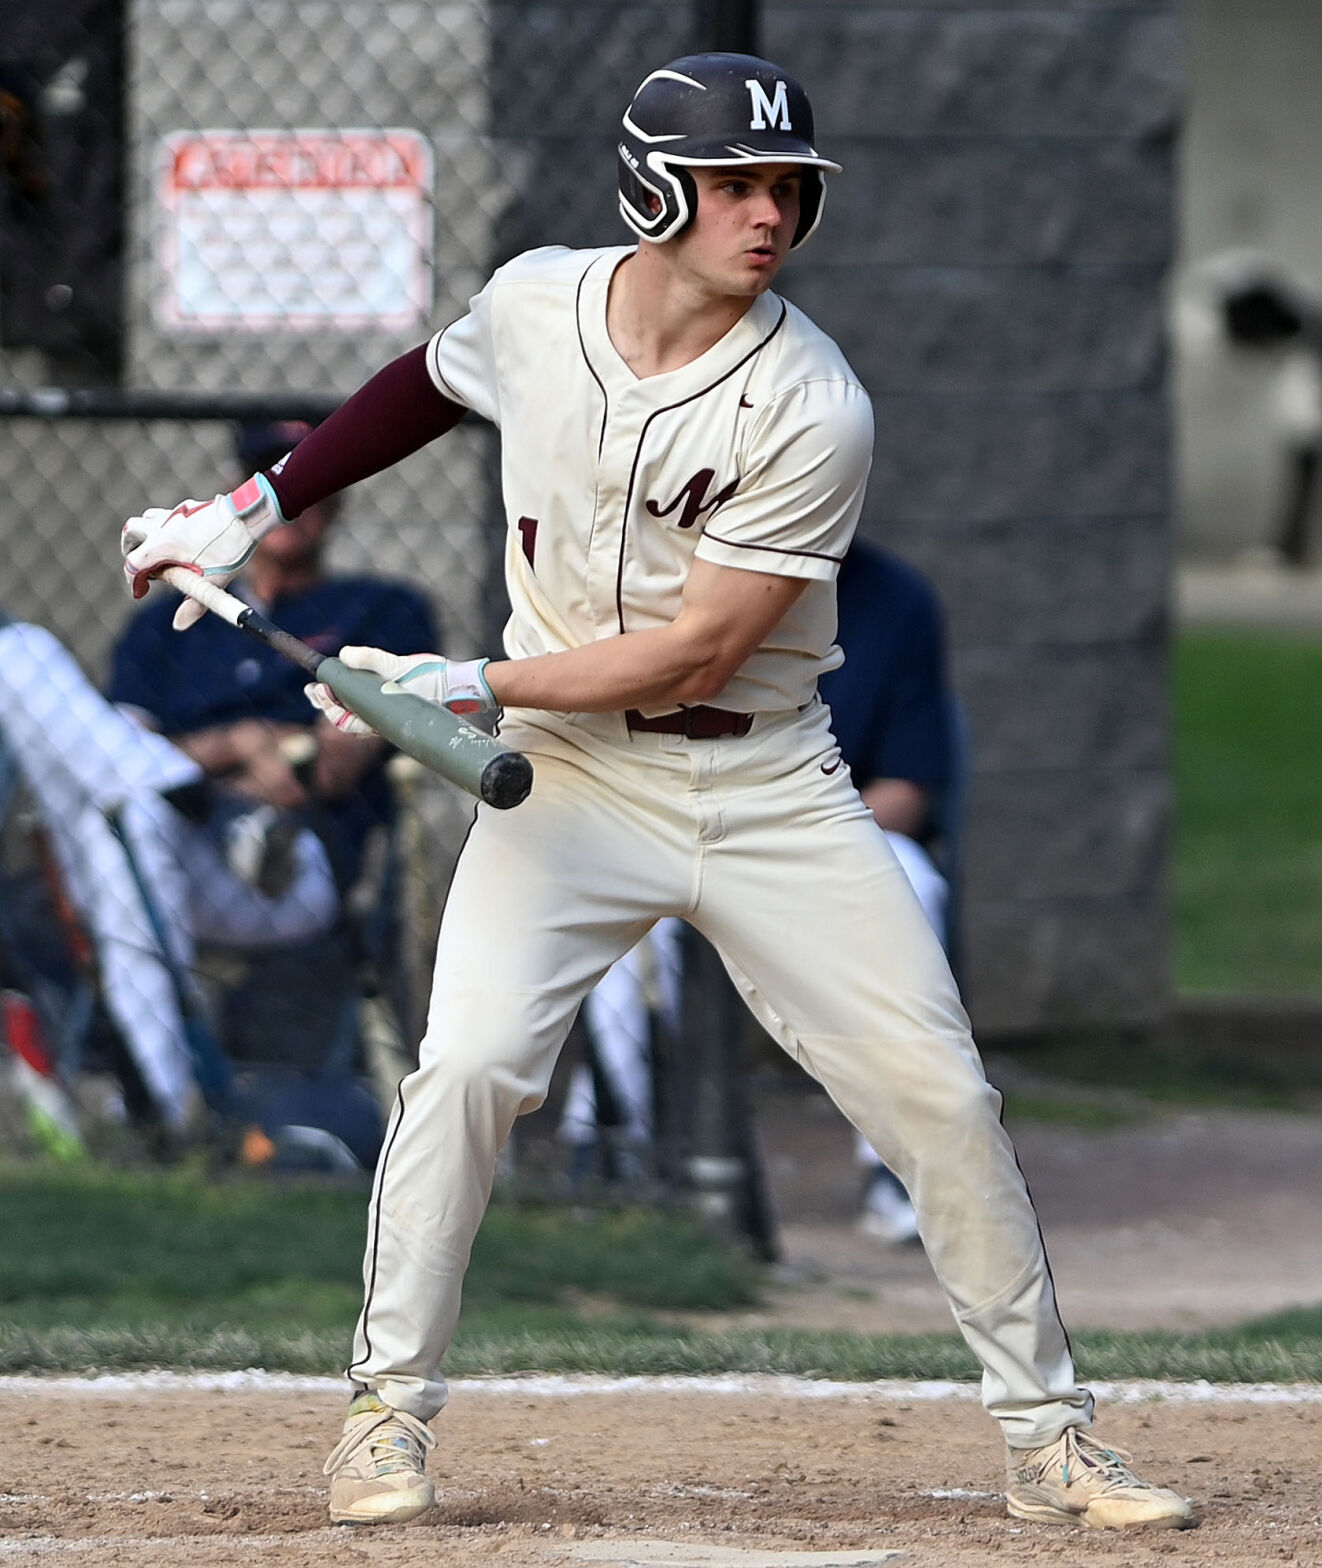 Mechanicsburg Baseball Stays Undefeated with Jeff Lougee and Reese Young Leading Victory over Carlisle